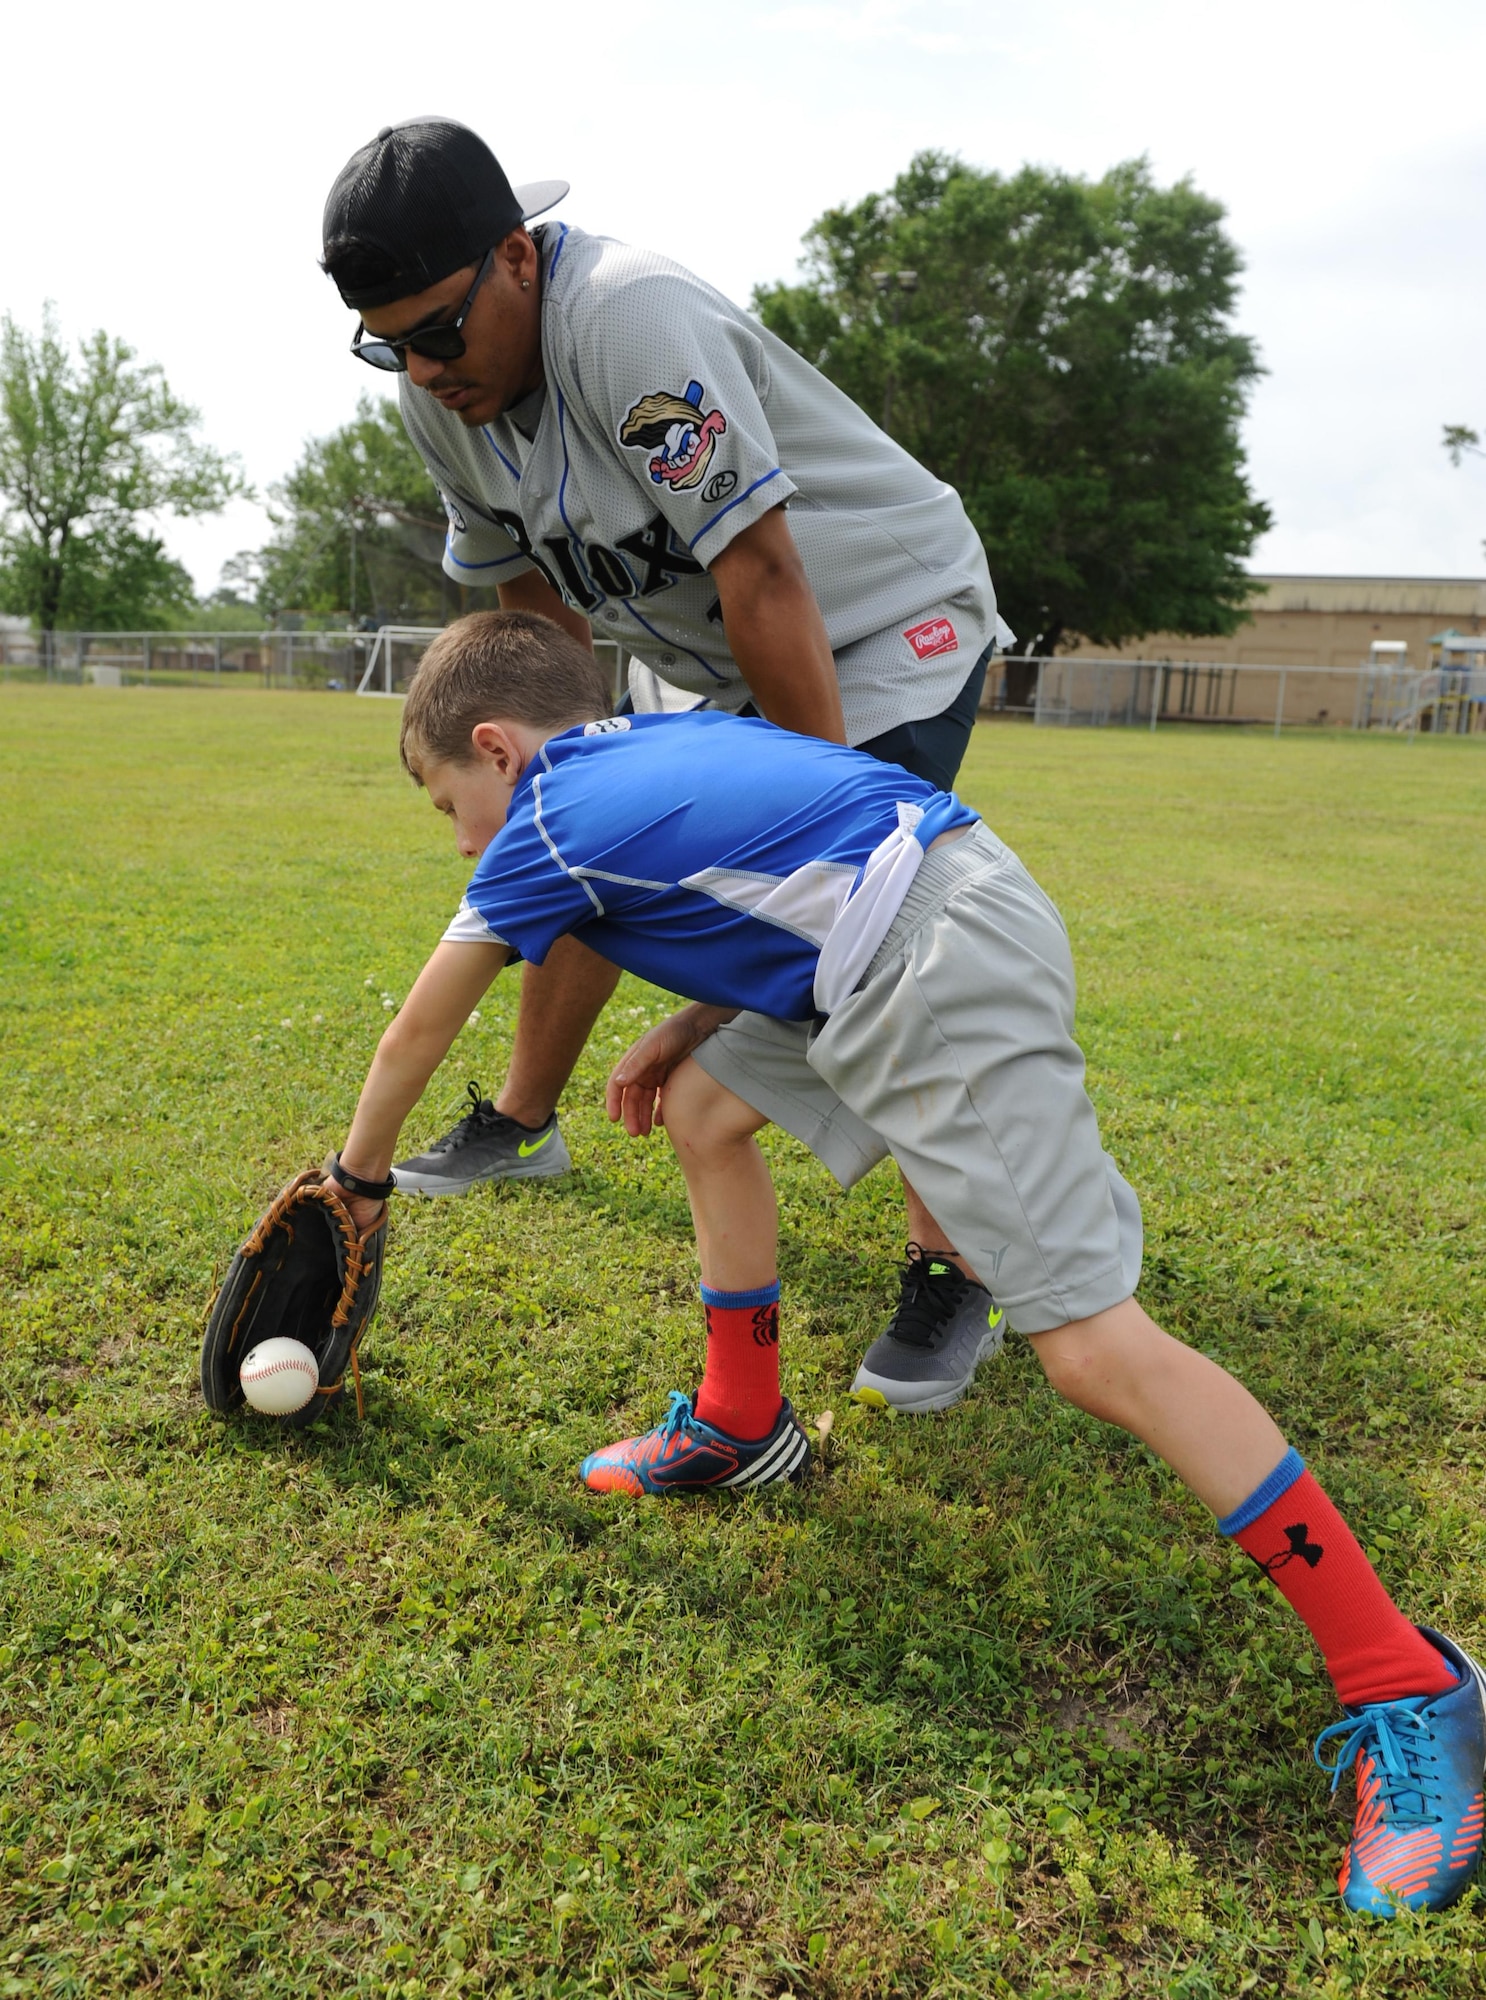 L.J. Reents, son of Master Sgt. Jamie Cleveland, 81st Surgical Operations Squadron physical therapy NCO in charge, receives fielding technique instruction from Rene Garcia, Biloxi Shuckers catcher, during the Biloxi Shucker’s Youth Baseball Clinic at the youth center baseball field April 30, 2016, Keesler Air Force Base, Miss. The clinic provided hitting, pitching, base running and fielding instruction from members of the Biloxi Shucker’s minor league baseball team. (U.S. Air Force photo by Kemberly Groue)